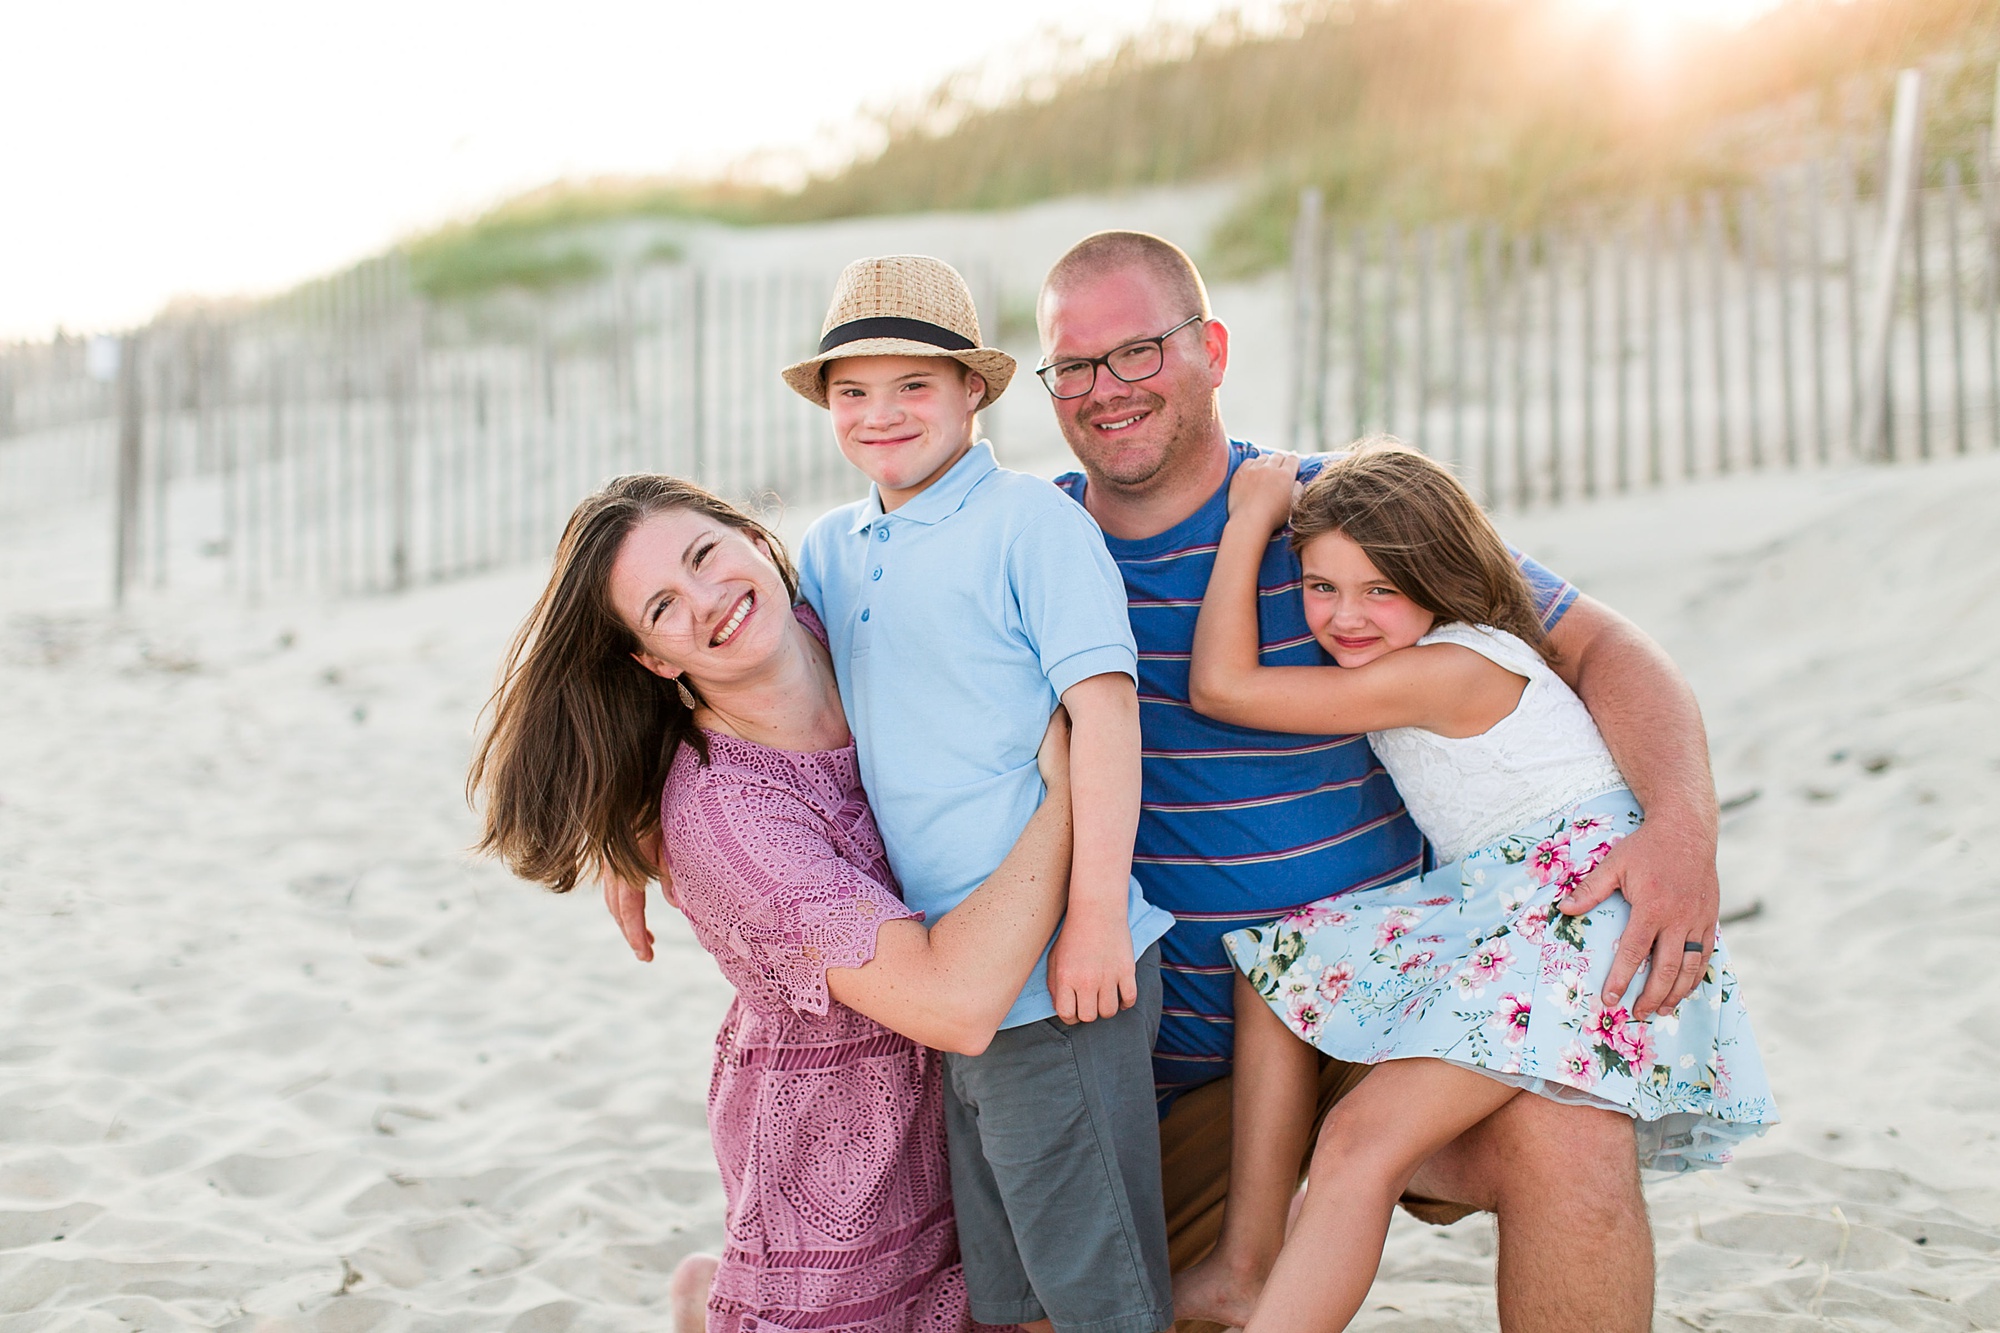 Frederick MD family photographer shares what she's thankful for this Thanksgiving